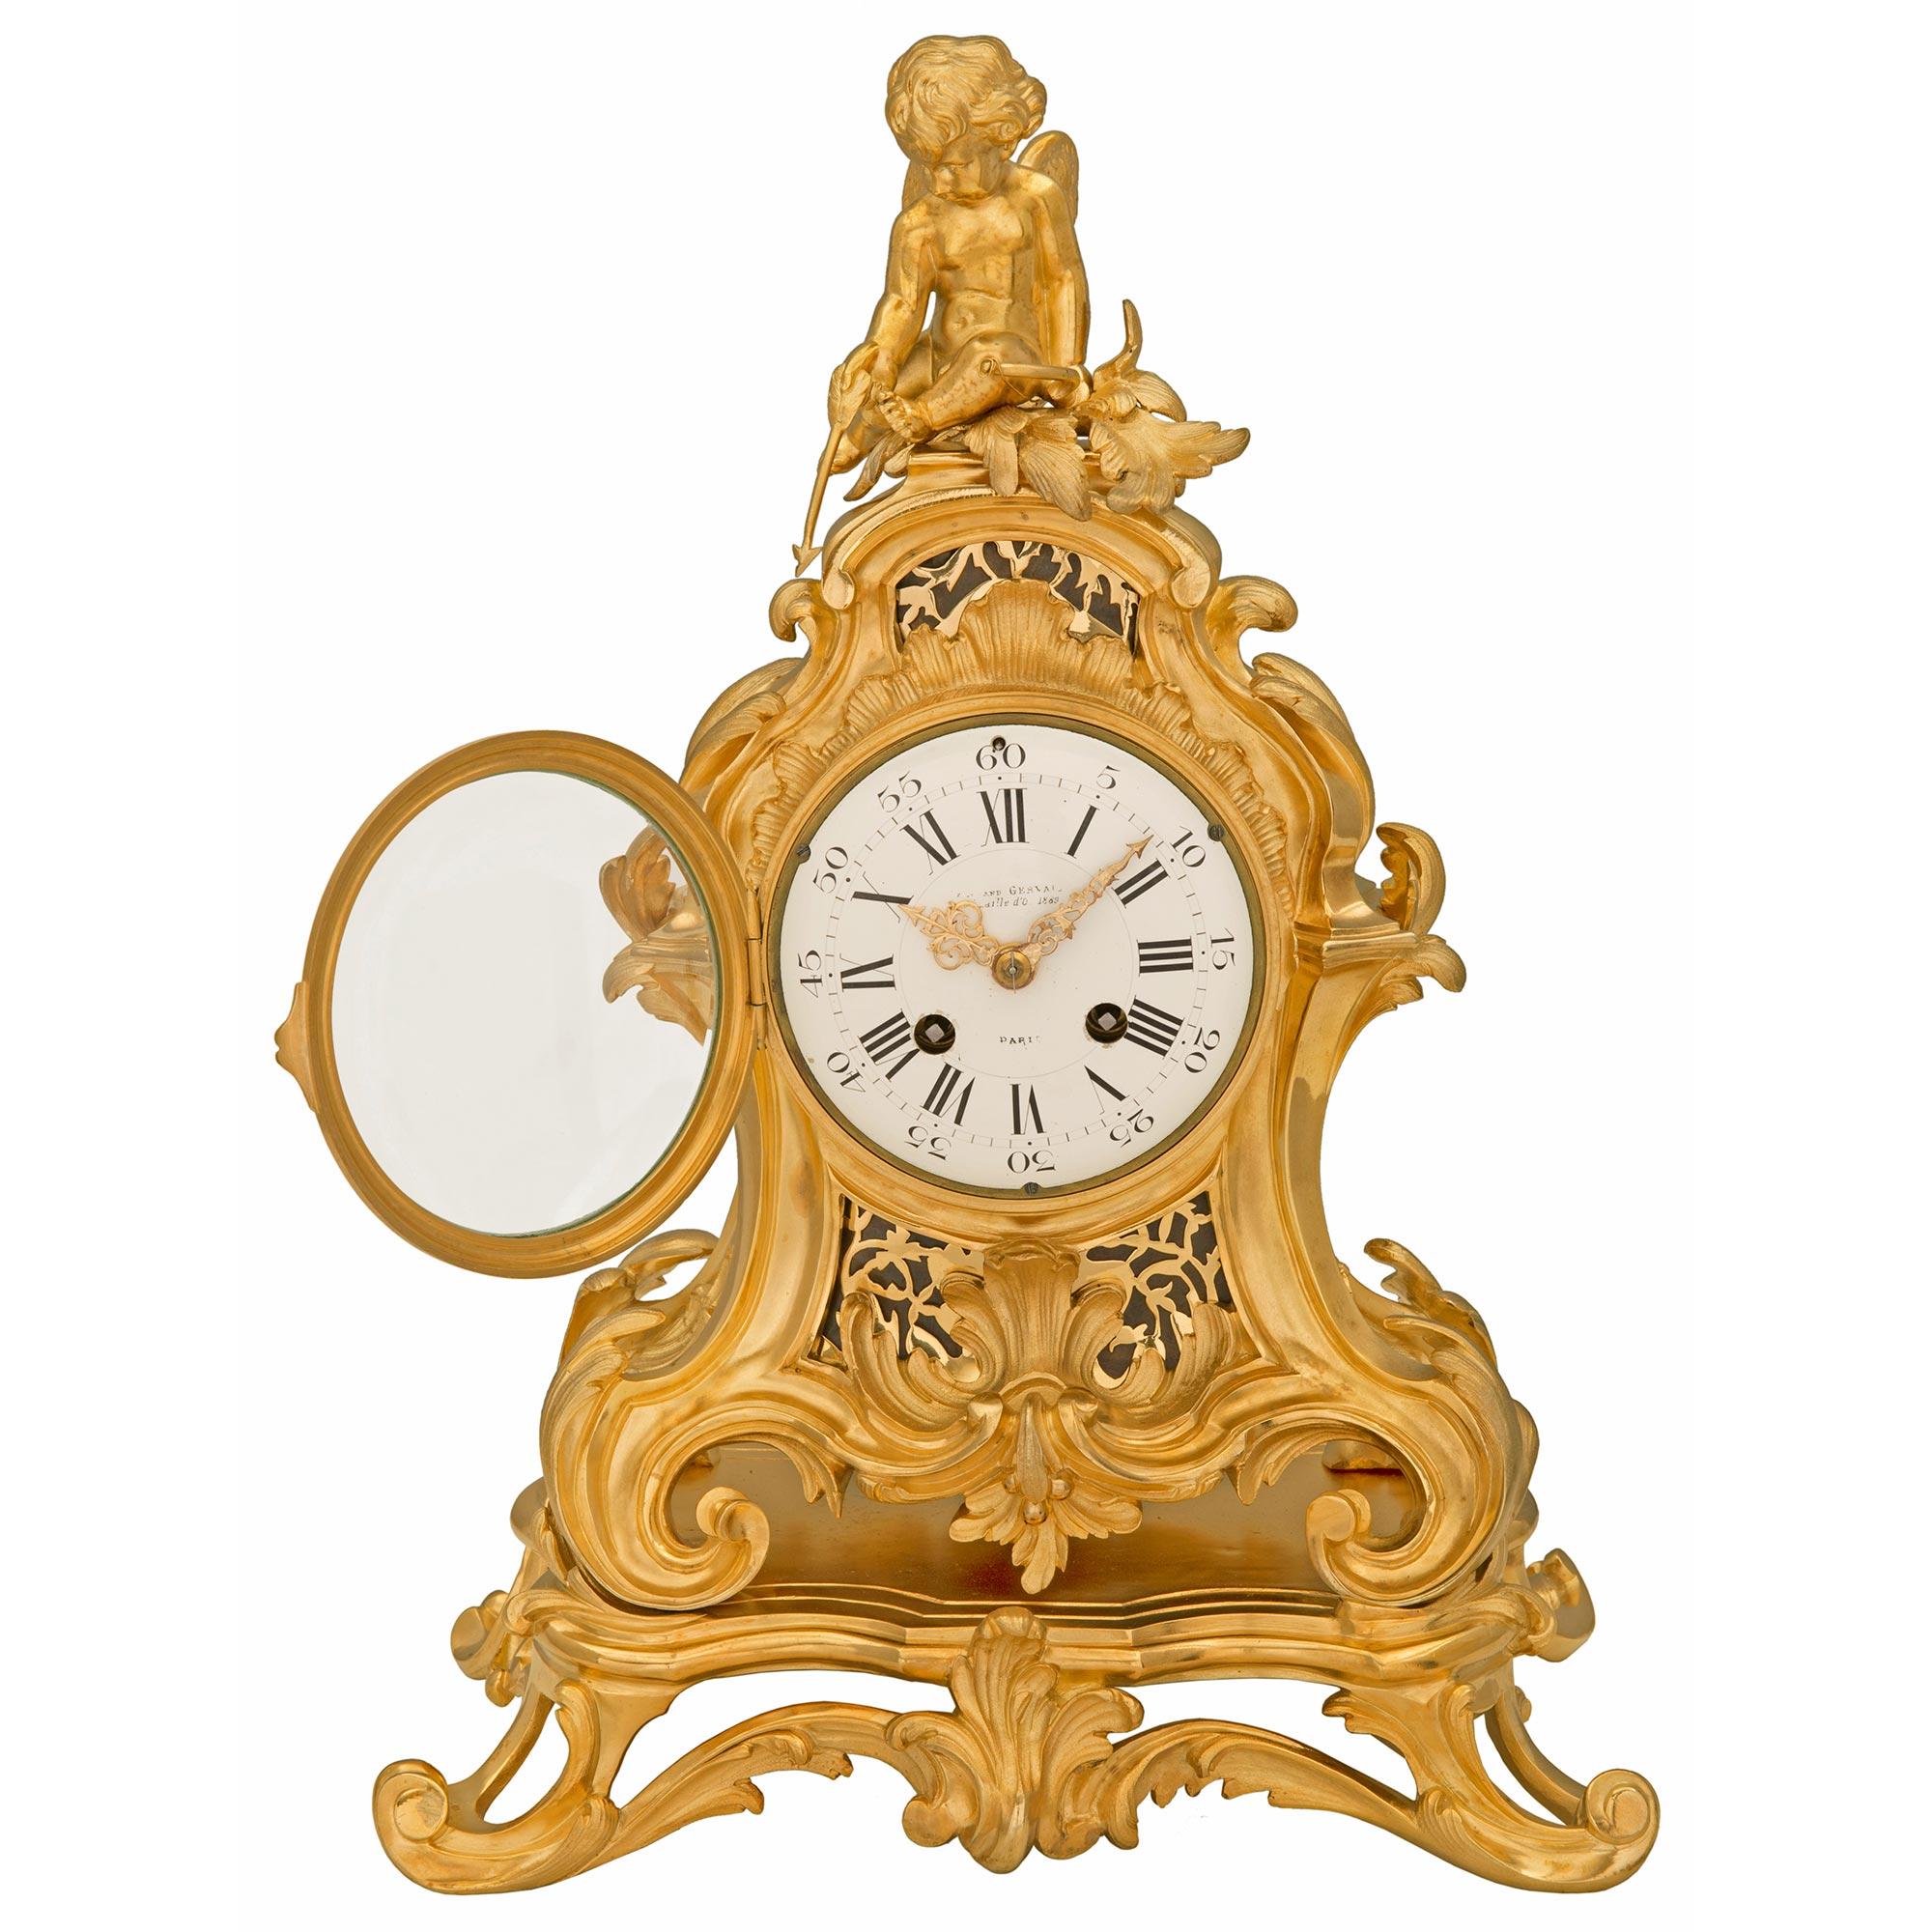 An exceptional and very high quality French 19th century Louis XV st. ormolu clock. The clock is raised by most elegant scroll acanthus leaves centering a beautiful foliate reserve. Additional luxuriant scrolls lead upwards to the beautiful pierced